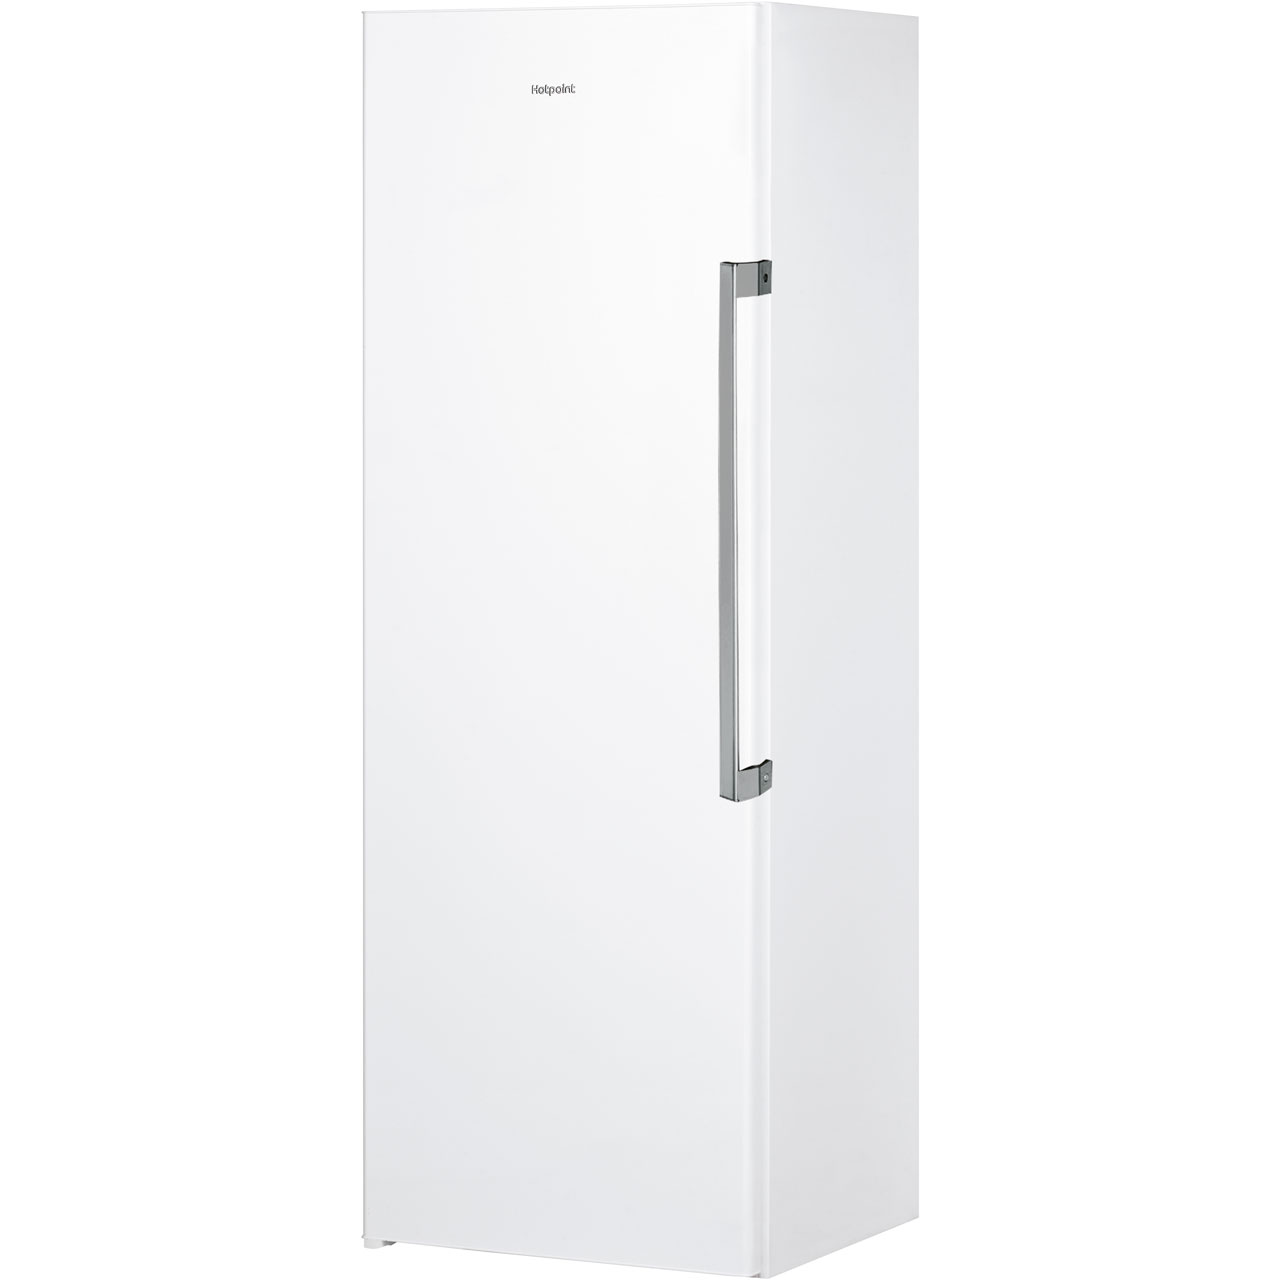 Hotpoint UH6F1CW Free Standing Freezer Frost Free in White